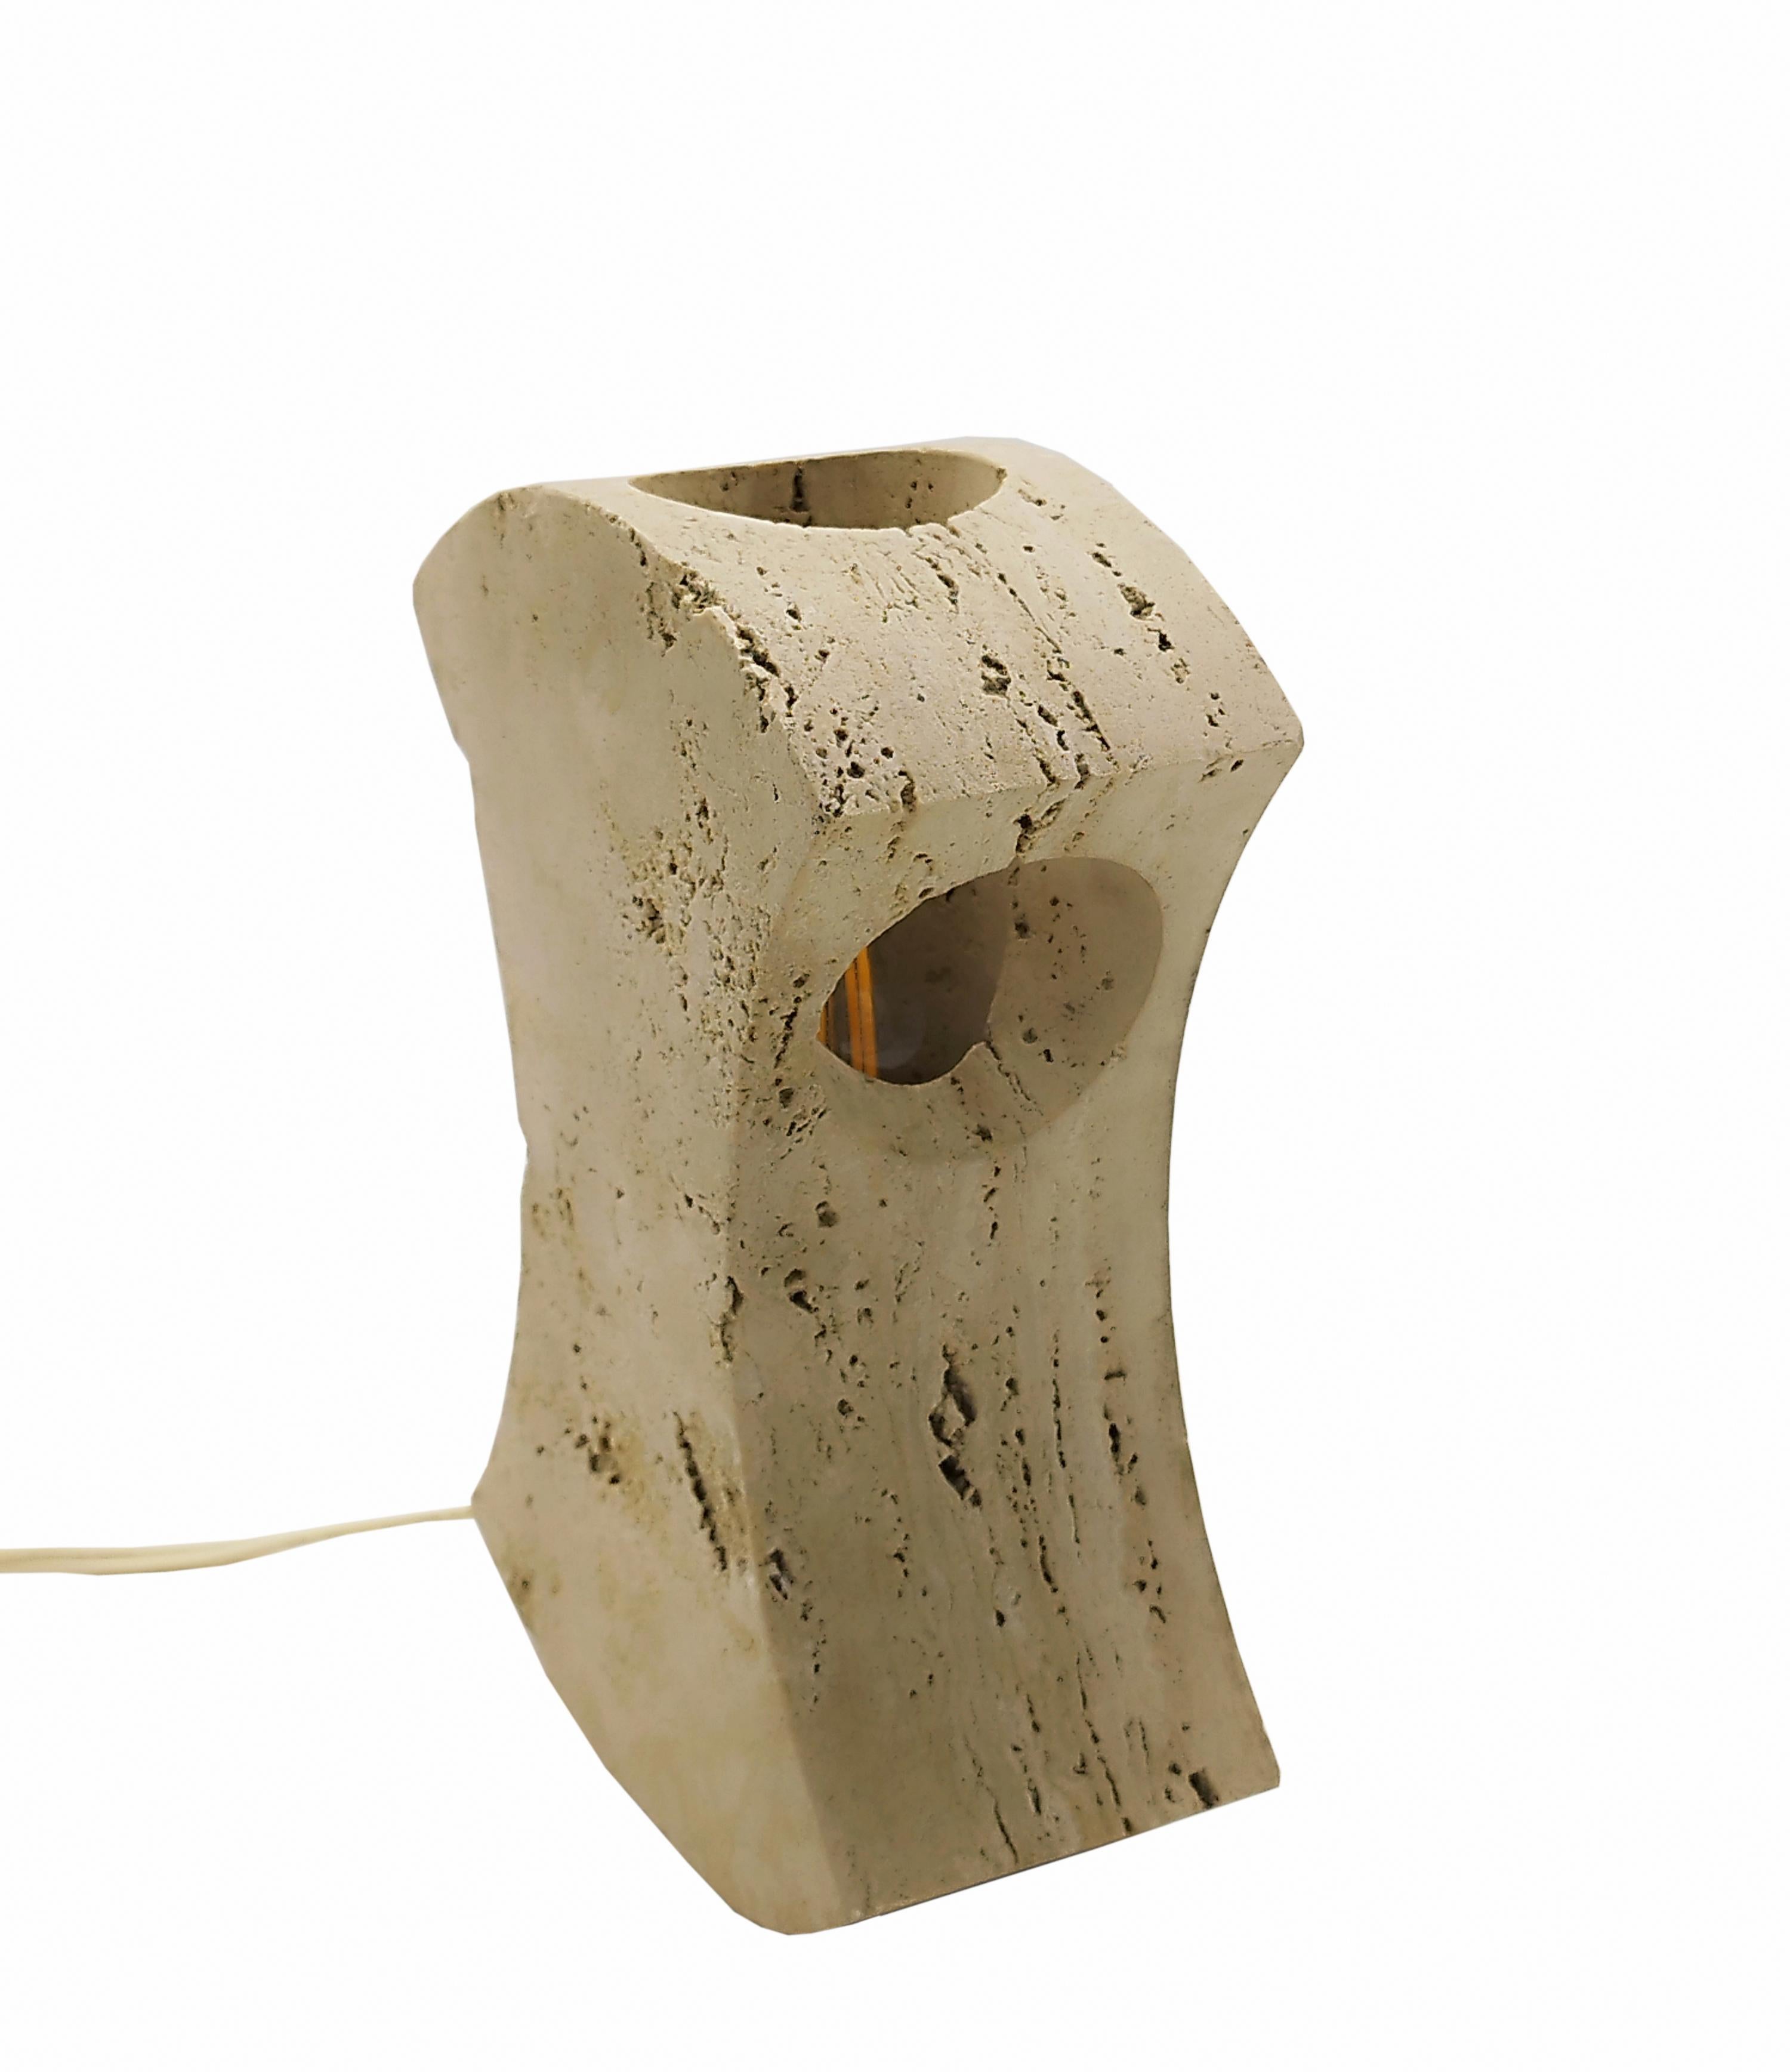 Designed around 1971 by Giuliano Cesari and Enrico Panzeri, this sculptural table lamp was made by Nucleo, a division of the Sormani furniture company in Milan, Italy. Made entirely from a single piece of travertine , the lamp boasts the